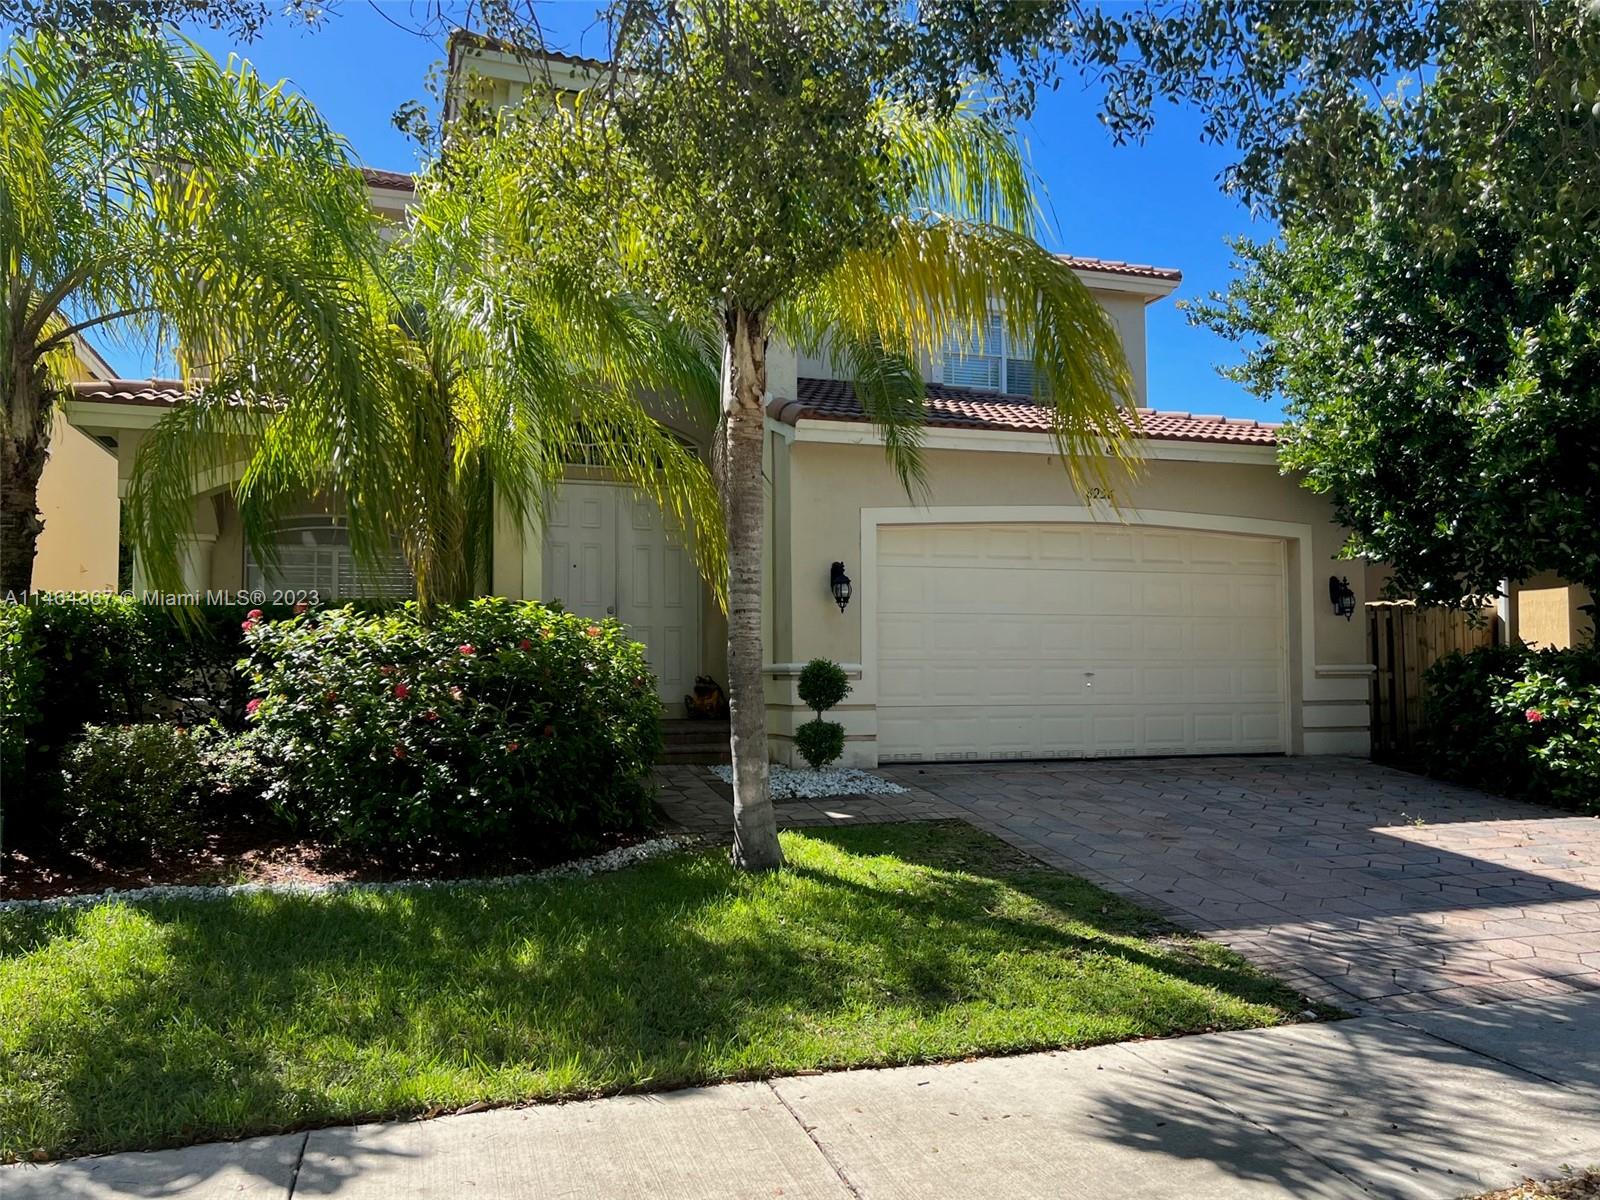 8956 SW 207th St, Cutler Bay, Florida 33189, 3 Bedrooms Bedrooms, ,2 BathroomsBathrooms,Residential,For Sale,8956 SW 207th St,A11464367